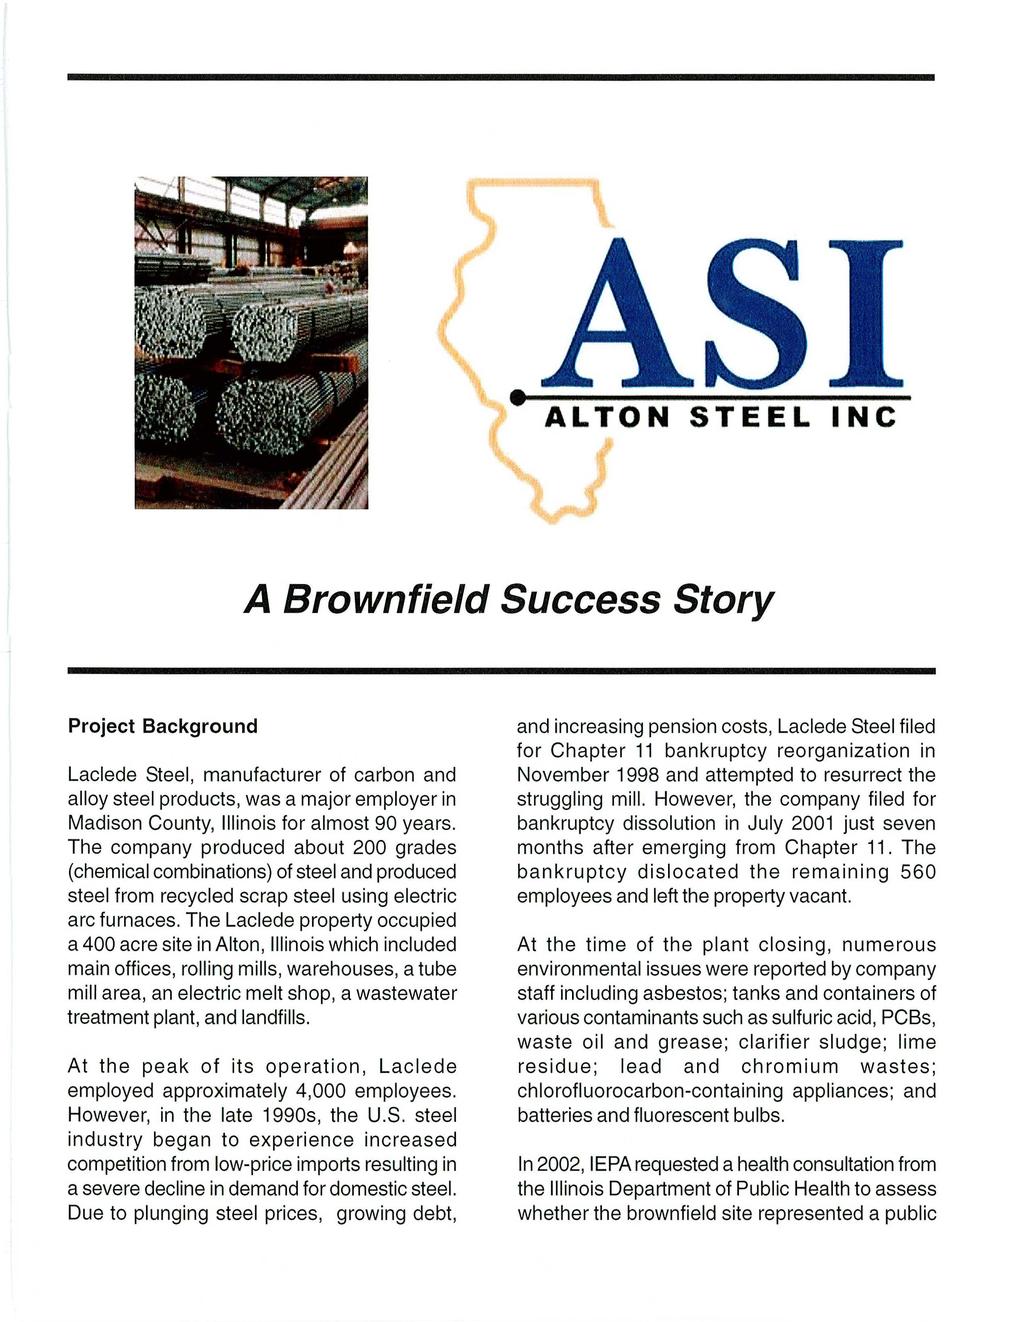 ALTON STEEL INC A Brownfield Success Story Project Background Laclede Steel, manufacturer of carbon and alloy steel products, was a major employer in Madison County, Illinois for almost 90 years.